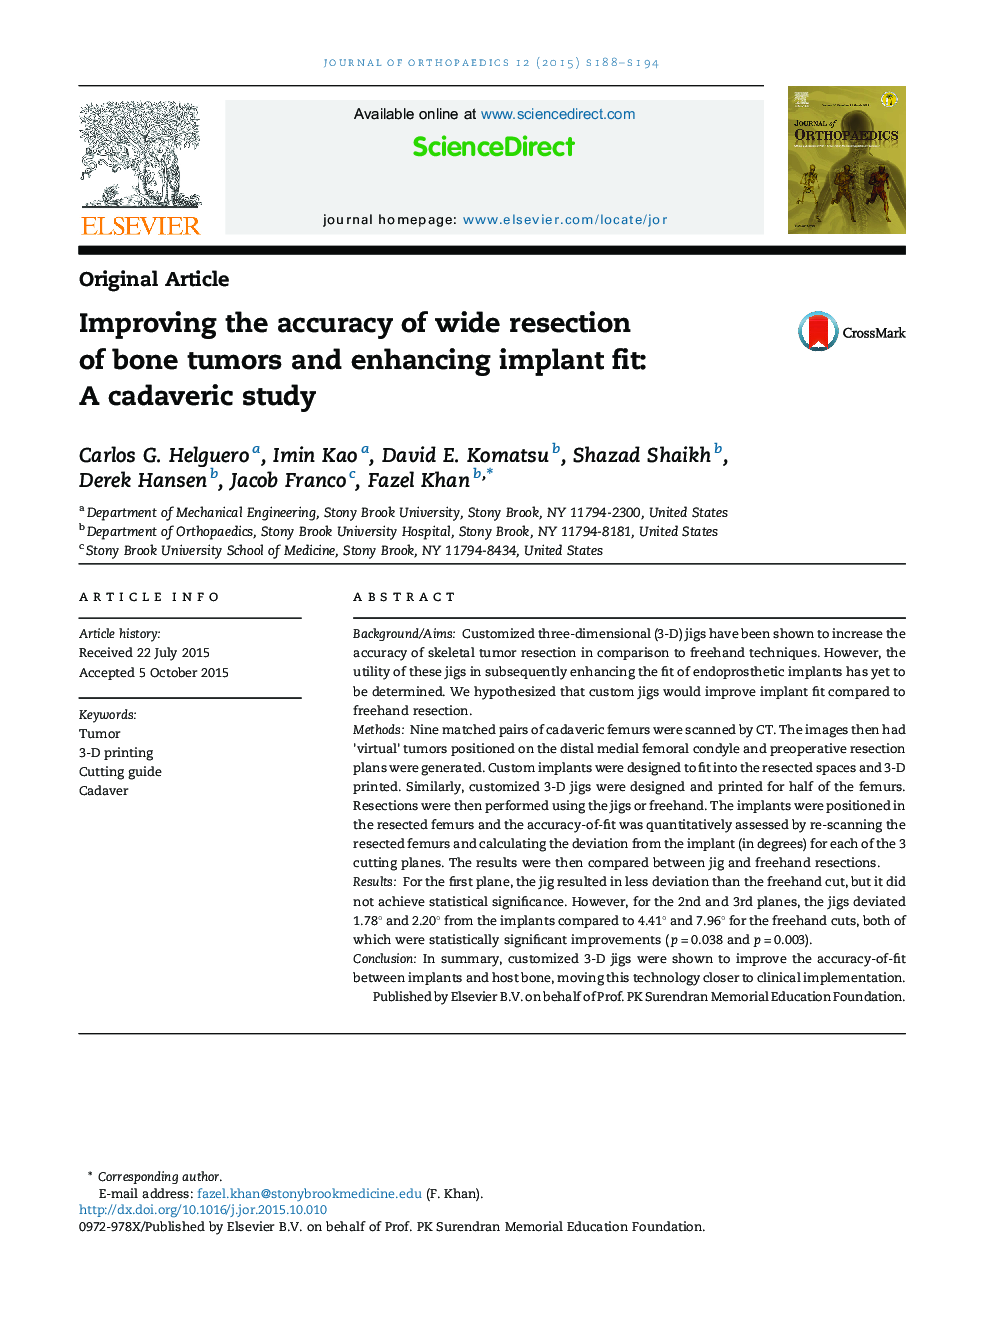 Improving the accuracy of wide resection of bone tumors and enhancing implant fit: A cadaveric study